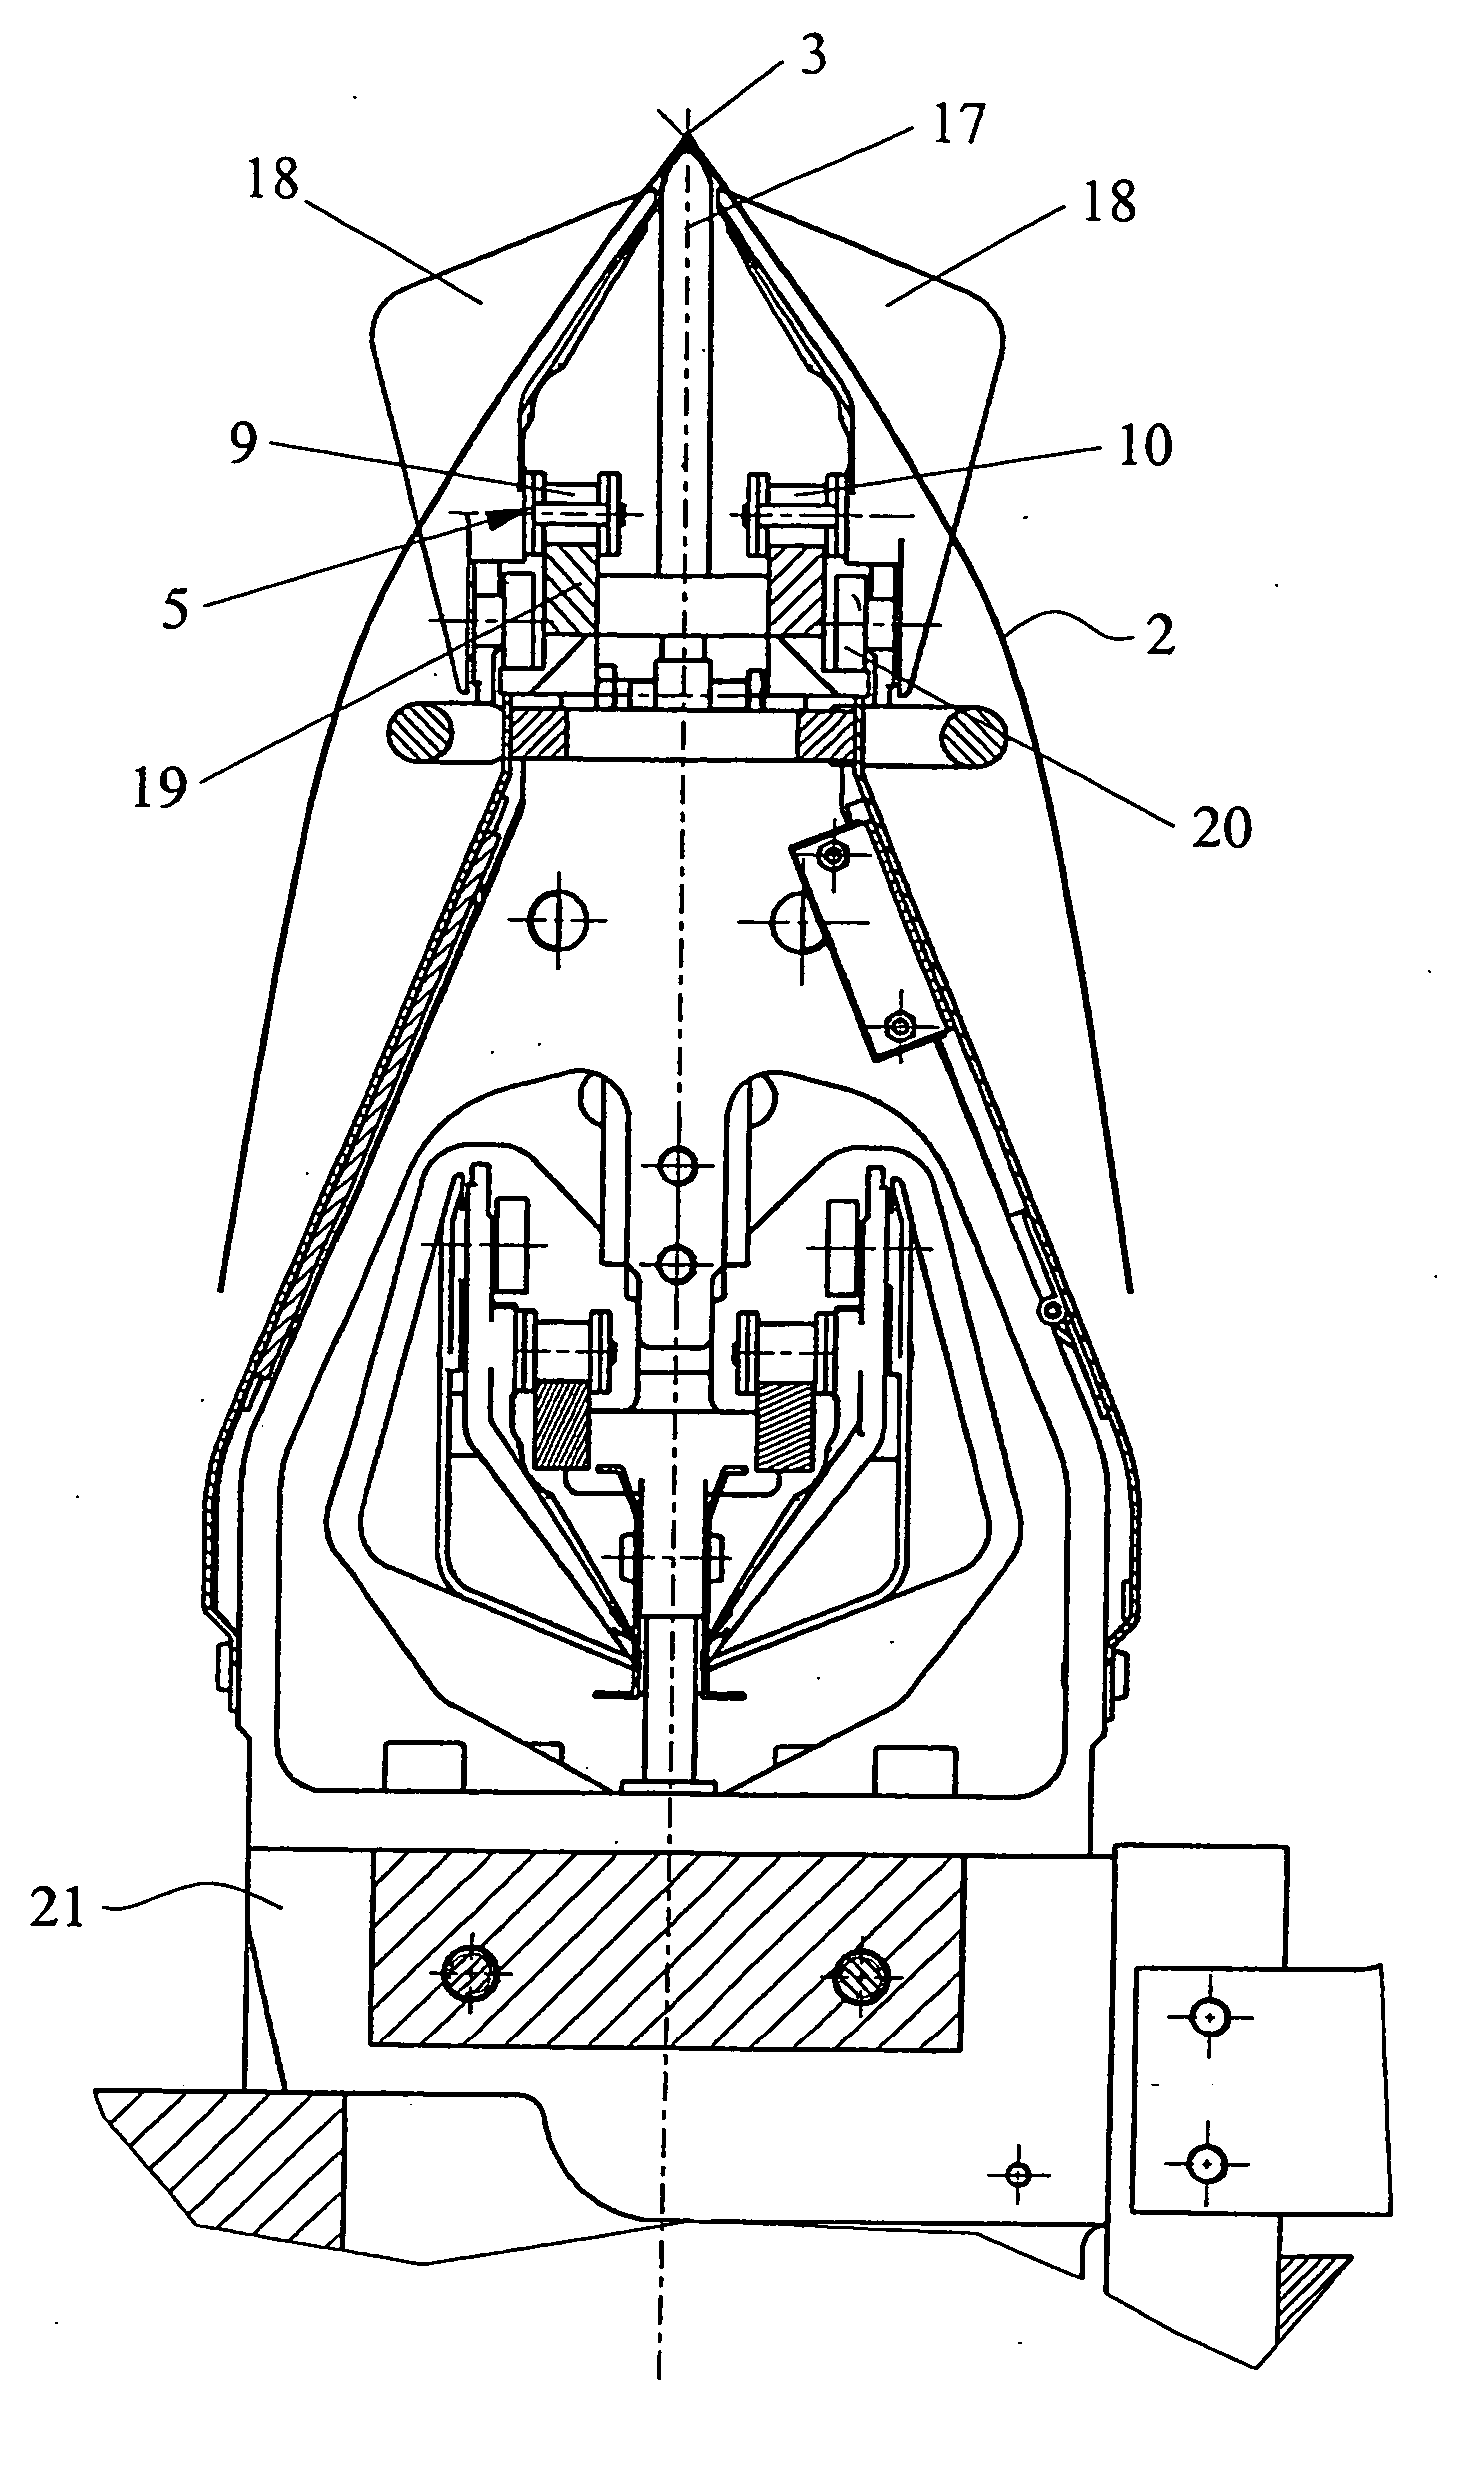 Arrangement for gathering and transporting print products deposited straddling on a conveying device